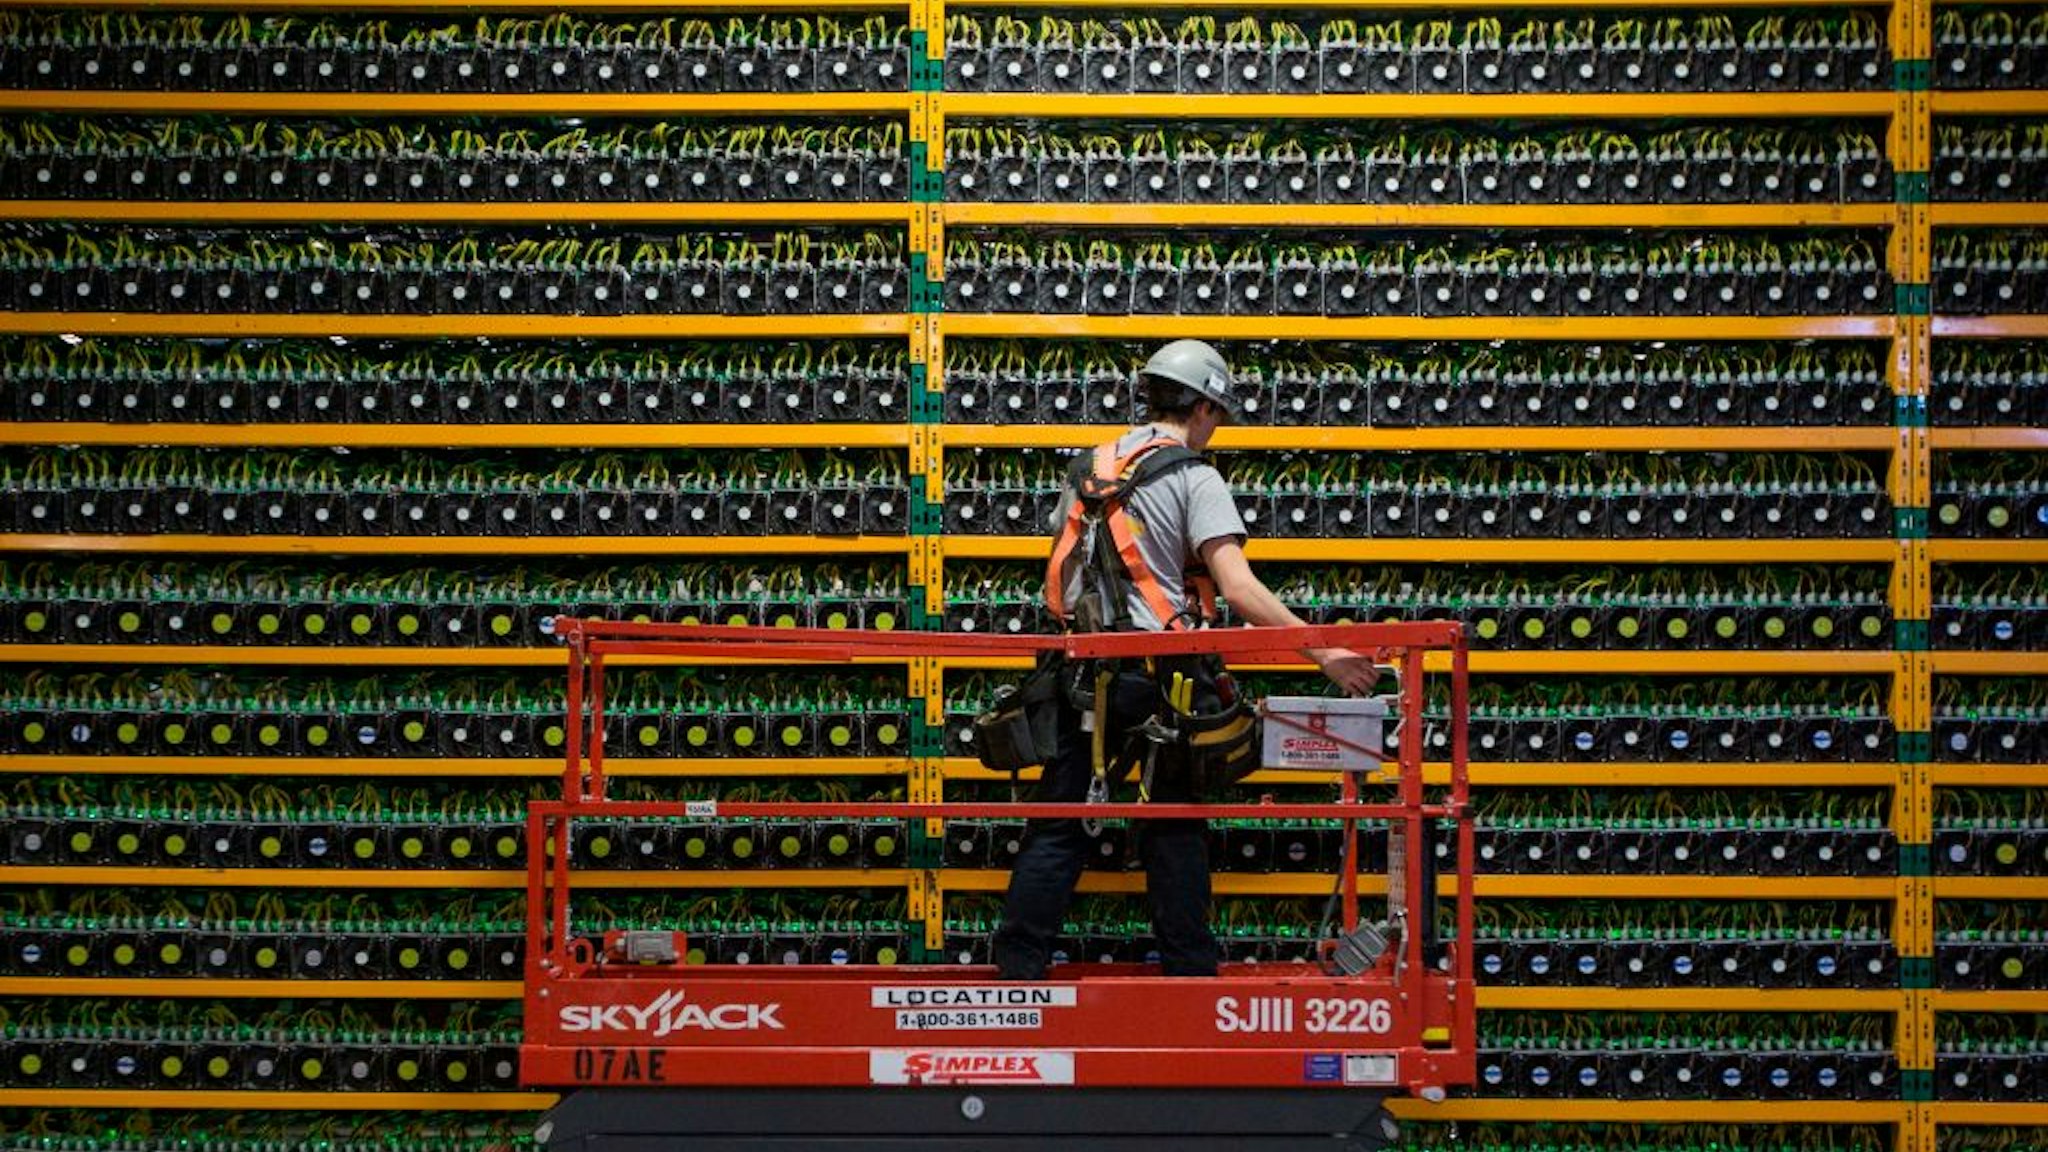 TOPSHOT - A technician inspects the backside of bitcoin mining at Bitfarms in Saint Hyacinthe, Quebec on March 19, 2018. - Bitcoin is a cryptocurrency and worldwide payment system. It is the first decentralized digital currency, as the system works based on the blockchain technology without a central bank or single administrator. (Photo by Lars Hagberg / AFP) (Photo by LARS HAGBERG/AFP via Getty Images)